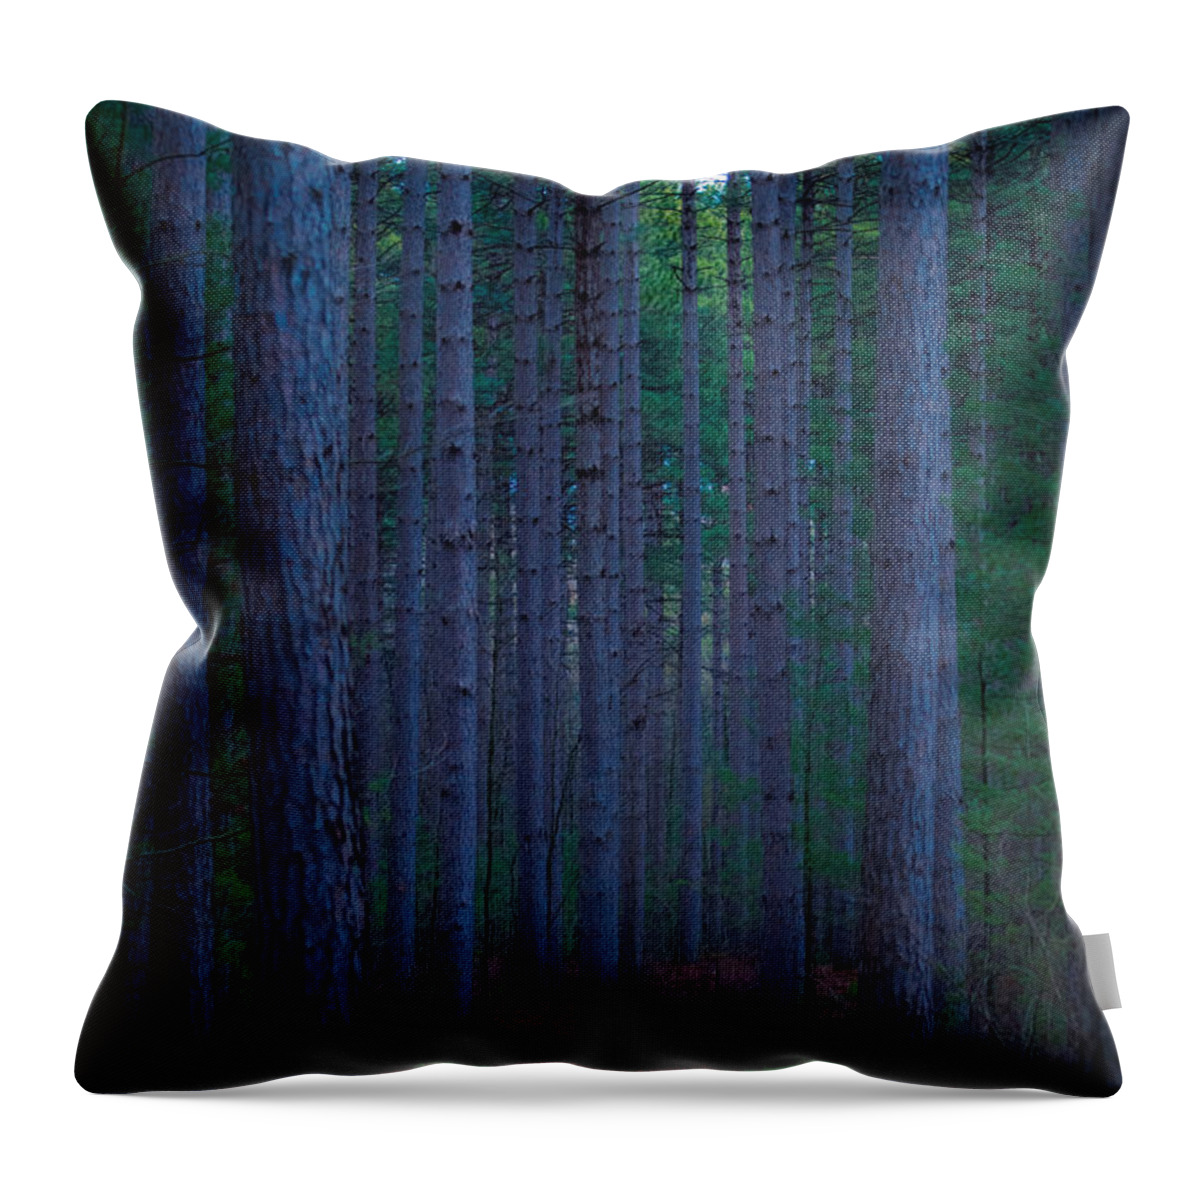 Larose Forest Throw Pillow featuring the photograph Larose Forest by Bianca Nadeau